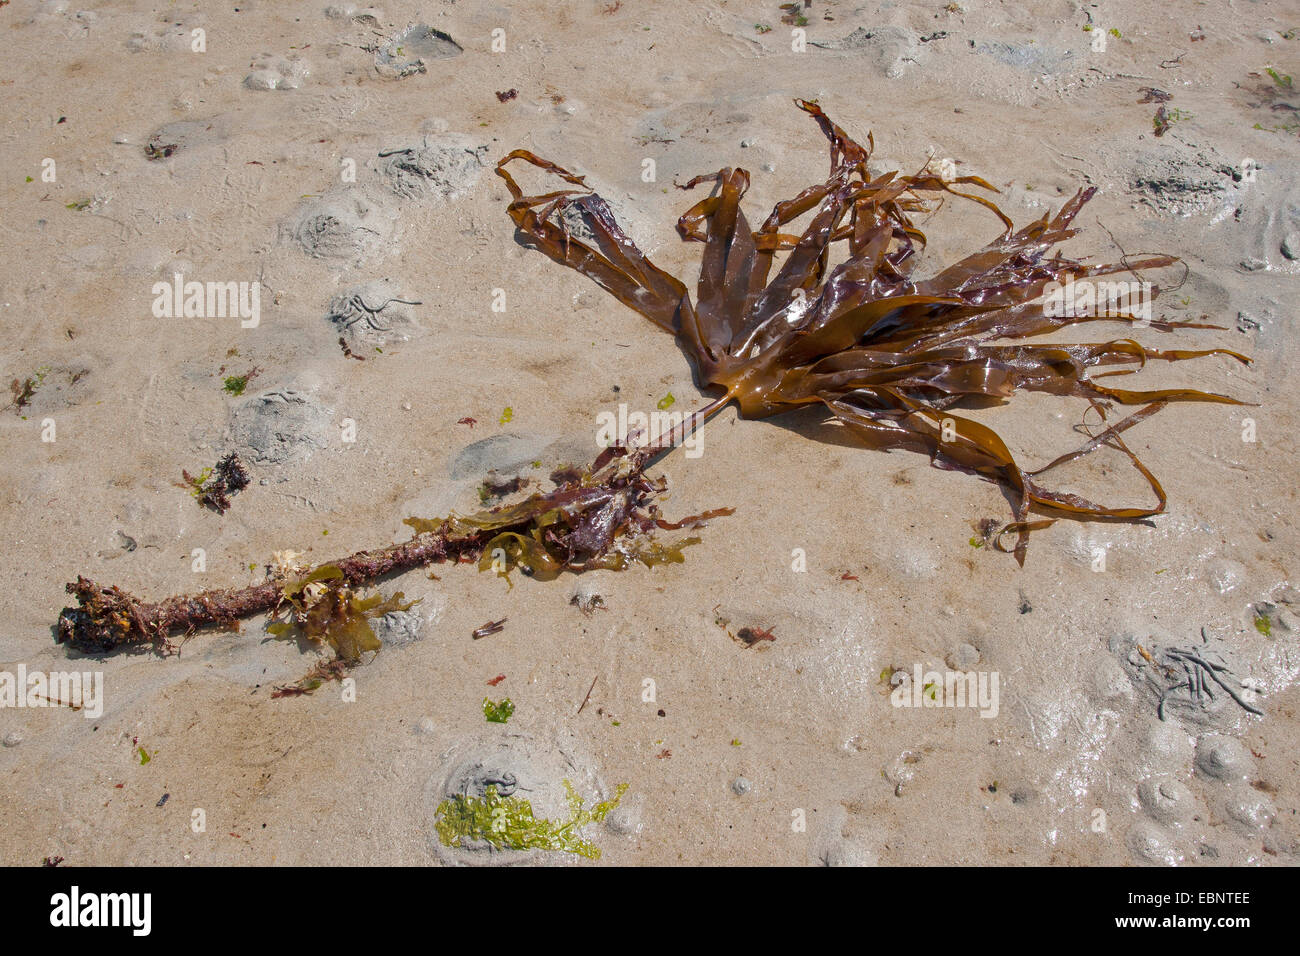 Mirkle, Kelpie, Liver weed, Pennant weed, Strapwrack, Cuvie, Tangle, Split whip wrack, Oarweed (Laminaria hyperborea), washed up on the beach, Germany Stock Photo